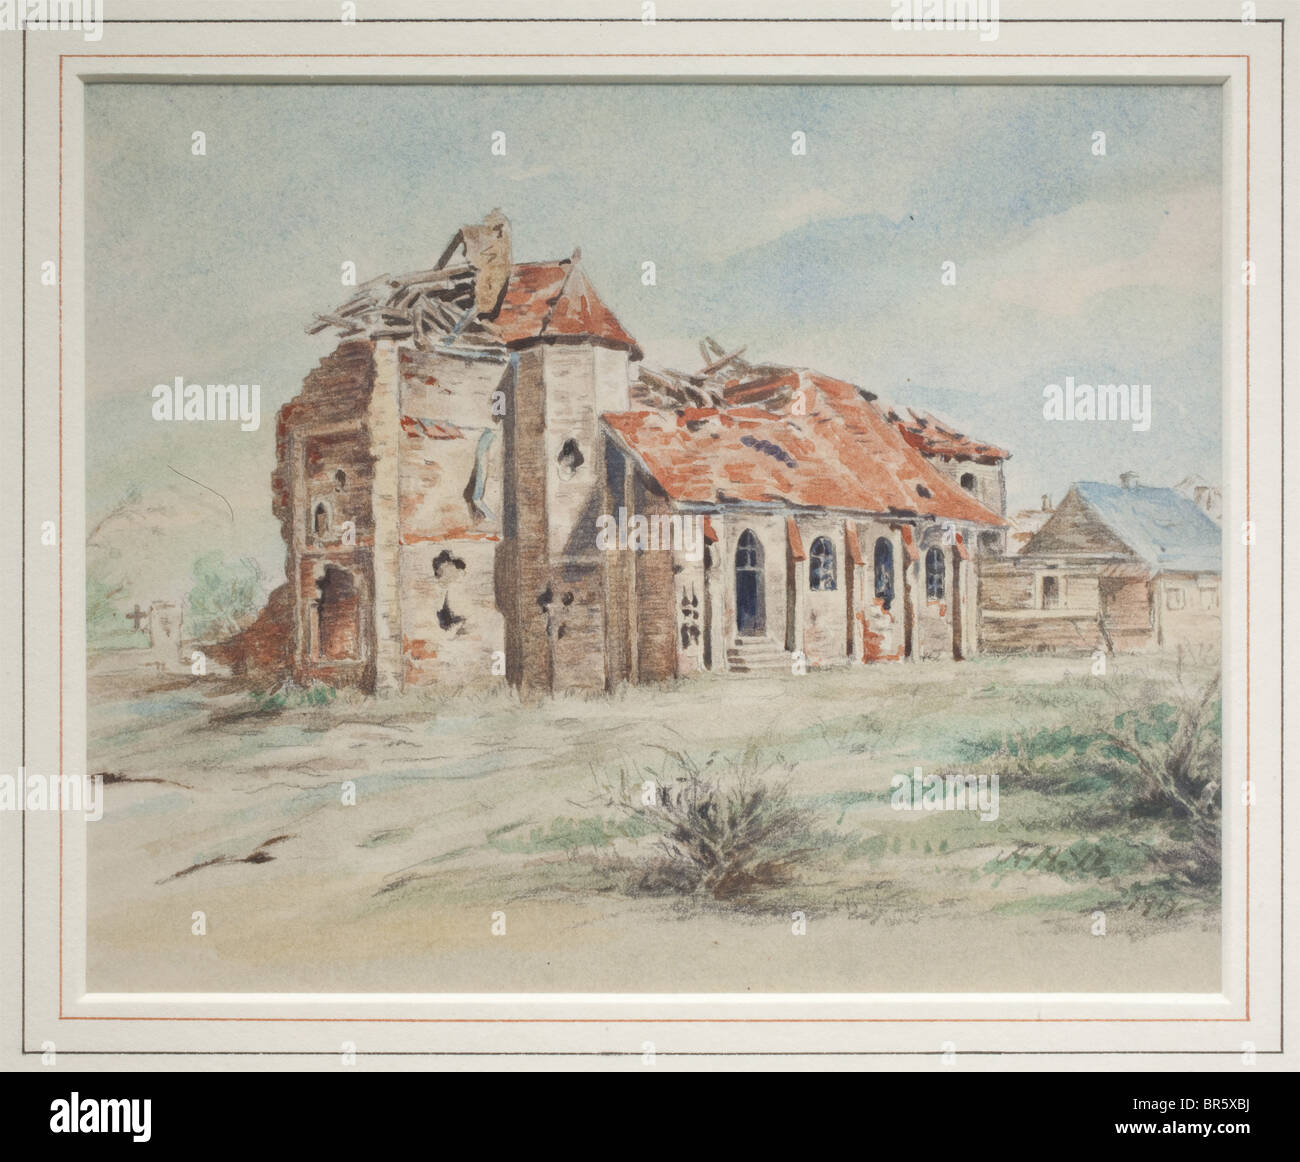 Adolf Hitler, a watercolour of a church ruin in Flanders Pencil and watercolours on paper, signed and dated 'A. Hitler 1917' on the lower right. Under glass, mounted and framed. Size of the painting 17 x 21 cm, framed 33.5 x 37.5 cm. In terms of content, this watercolour belongs to Hitler's works from the front. It was painted during the First World War and was published by Heinrich Hoffmann in a special volume in April 1936. The file included a similar pencil drawing bearing the date 27th June 1917 and depicting the church of Ardoye about 30 km south of Bruges, Stock Photo